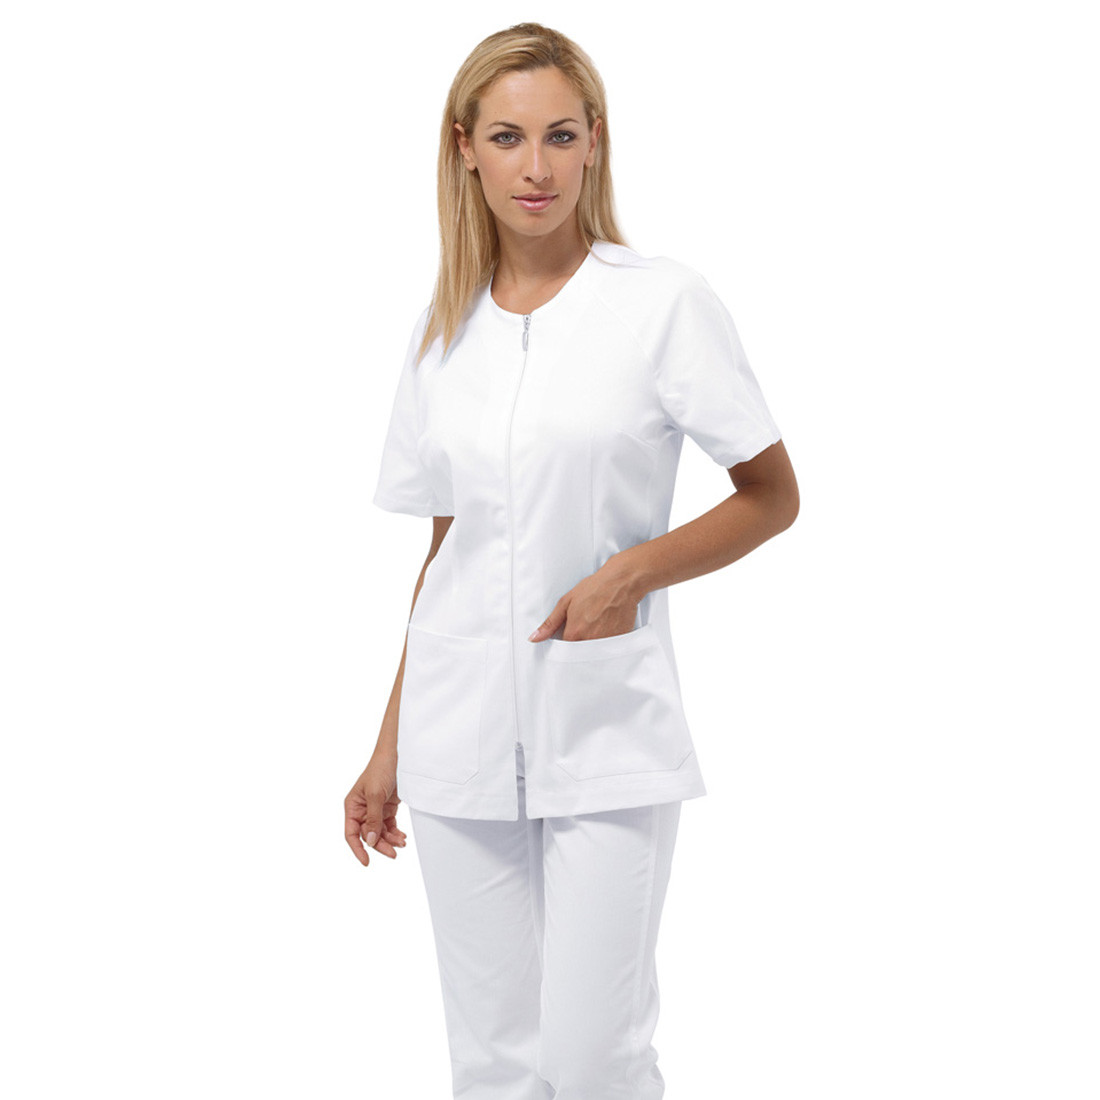 ROSES medical tunic - Safetywear